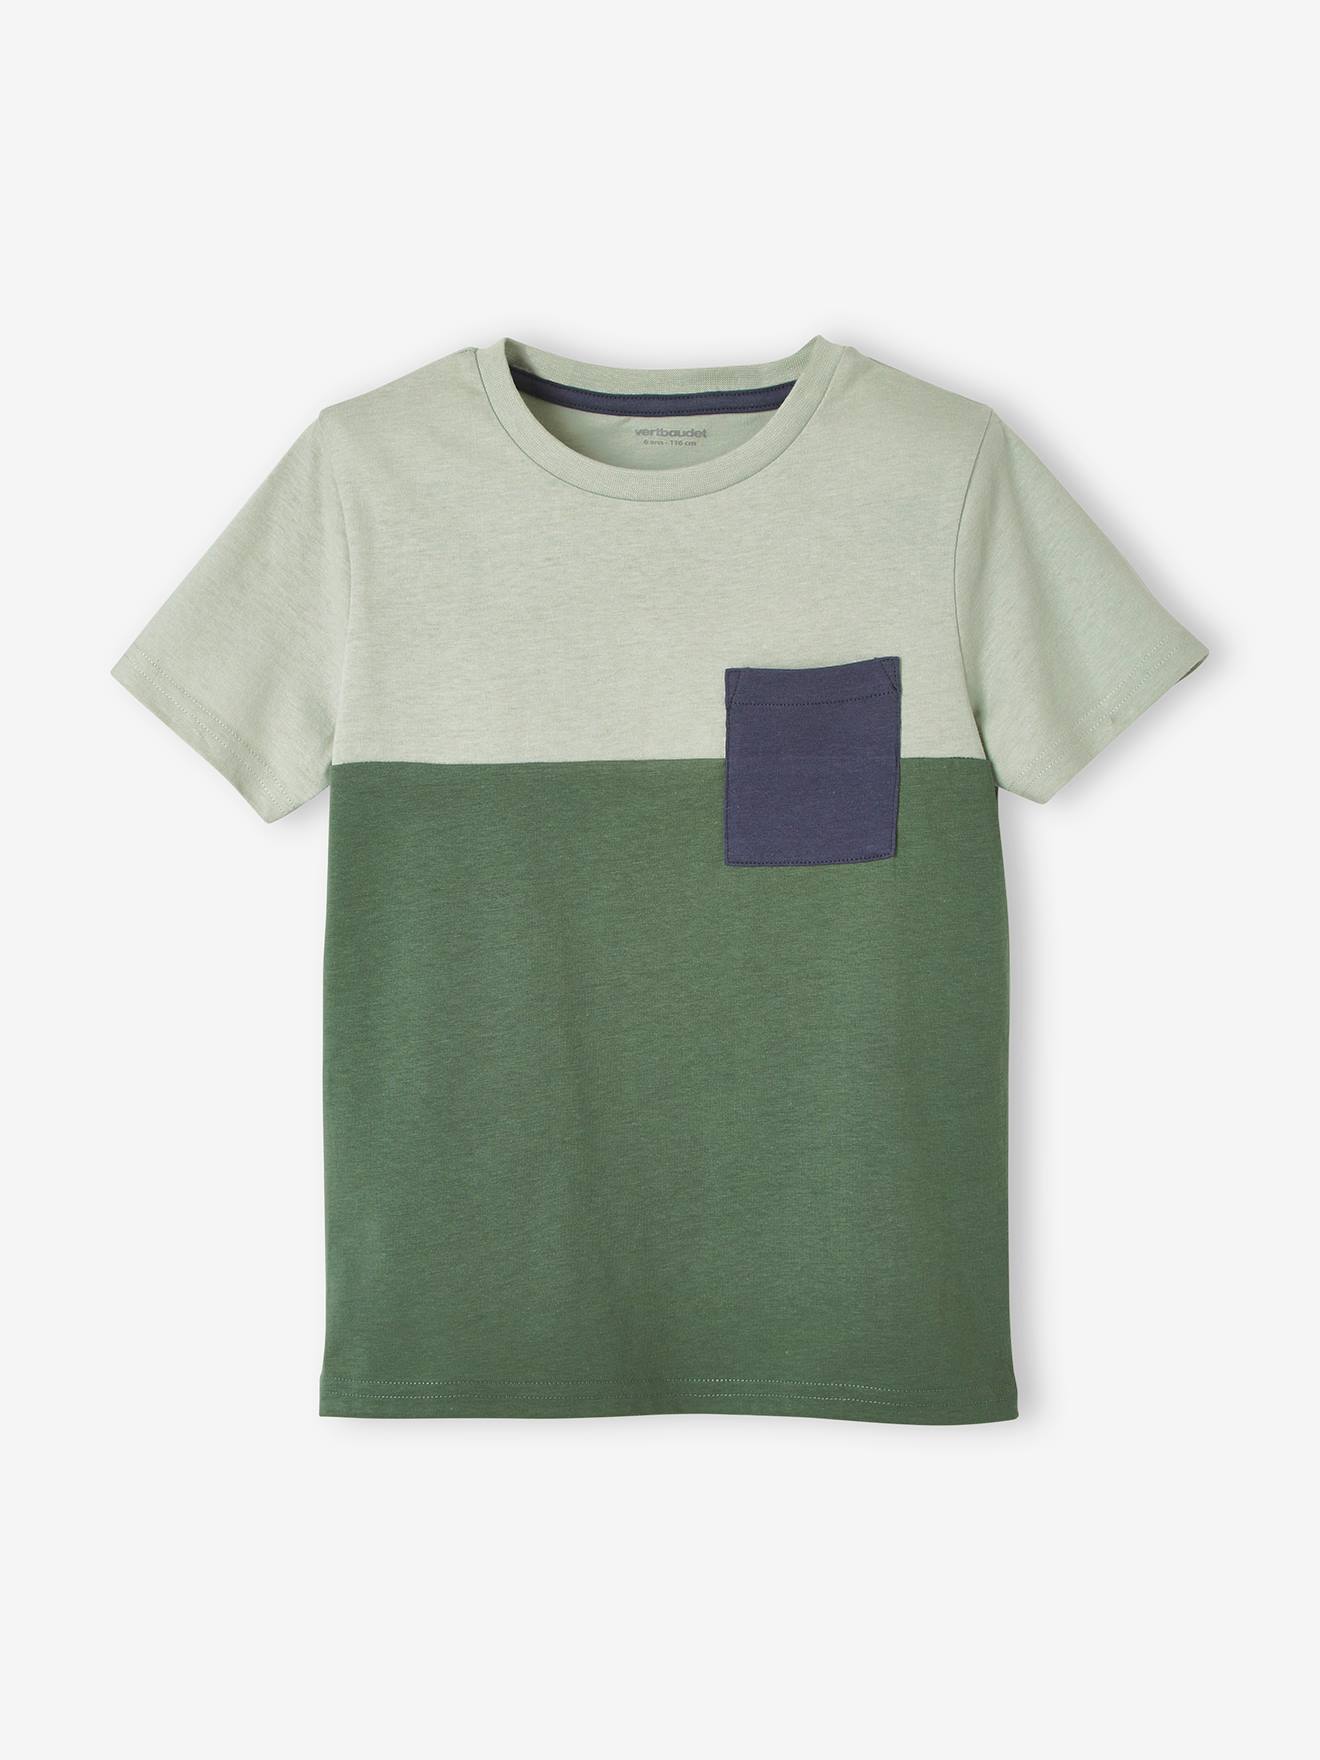 Colourblock T-Shirt for Boys green dark solid with design